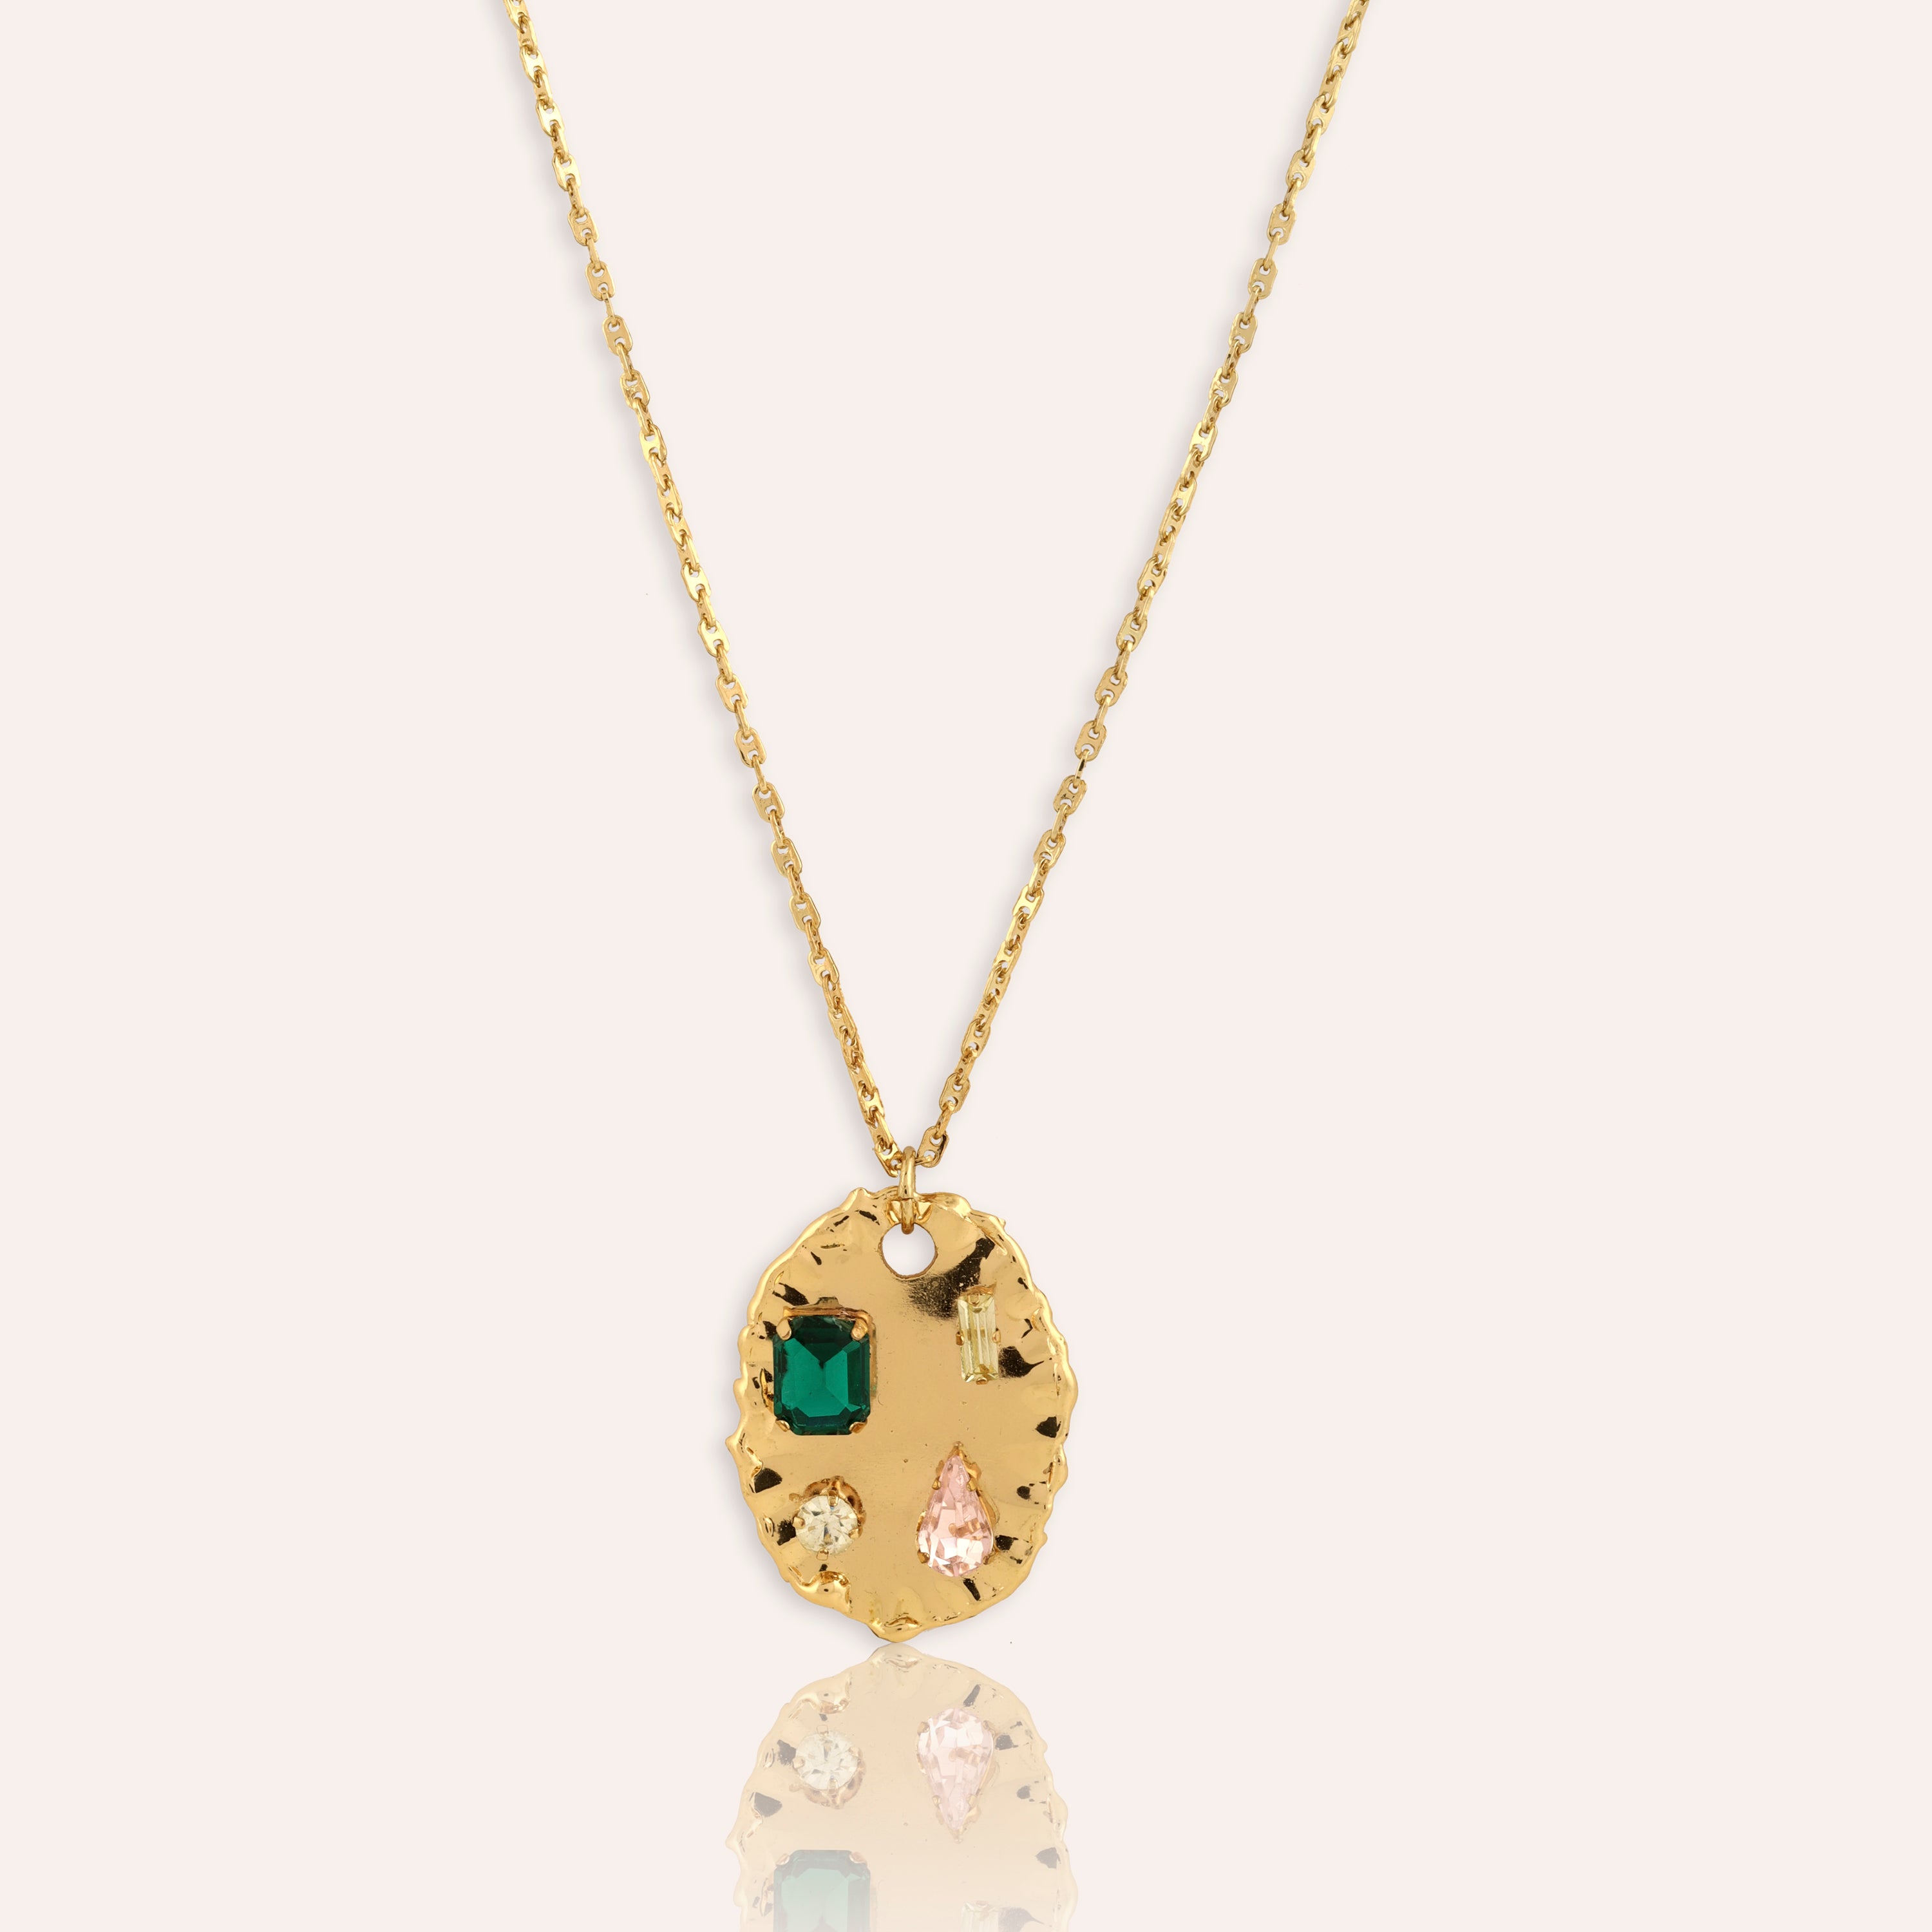 TFC Cupid Gold Plated Pendant Necklace-Enhance your elegance with our collection of gold-plated necklaces for women. Choose from stunning pendant necklaces, chic choker necklaces, and trendy layered necklaces. Our sleek and dainty designs are both affordable and anti-tarnish, ensuring lasting beauty. Enjoy the cheapest fashion jewellery, lightweight and stylish- only at The Fun Company